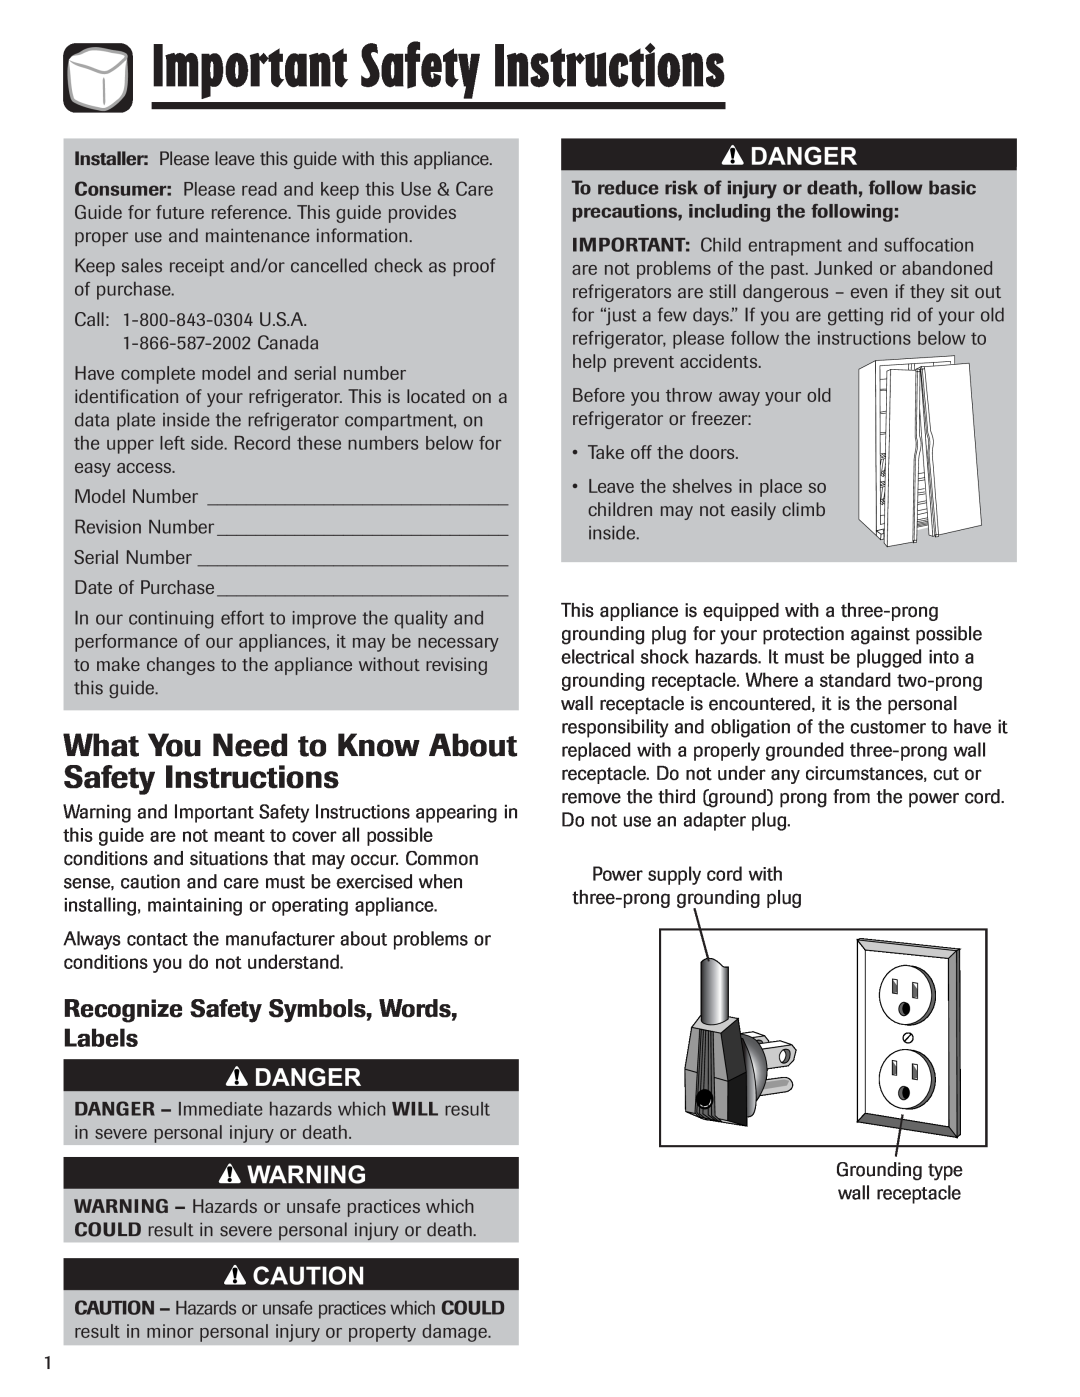 Amana ASD2328HEQ, ASD2328HEB Important Safety Instructions, What You Need to Know About Safety Instructions, Danger 